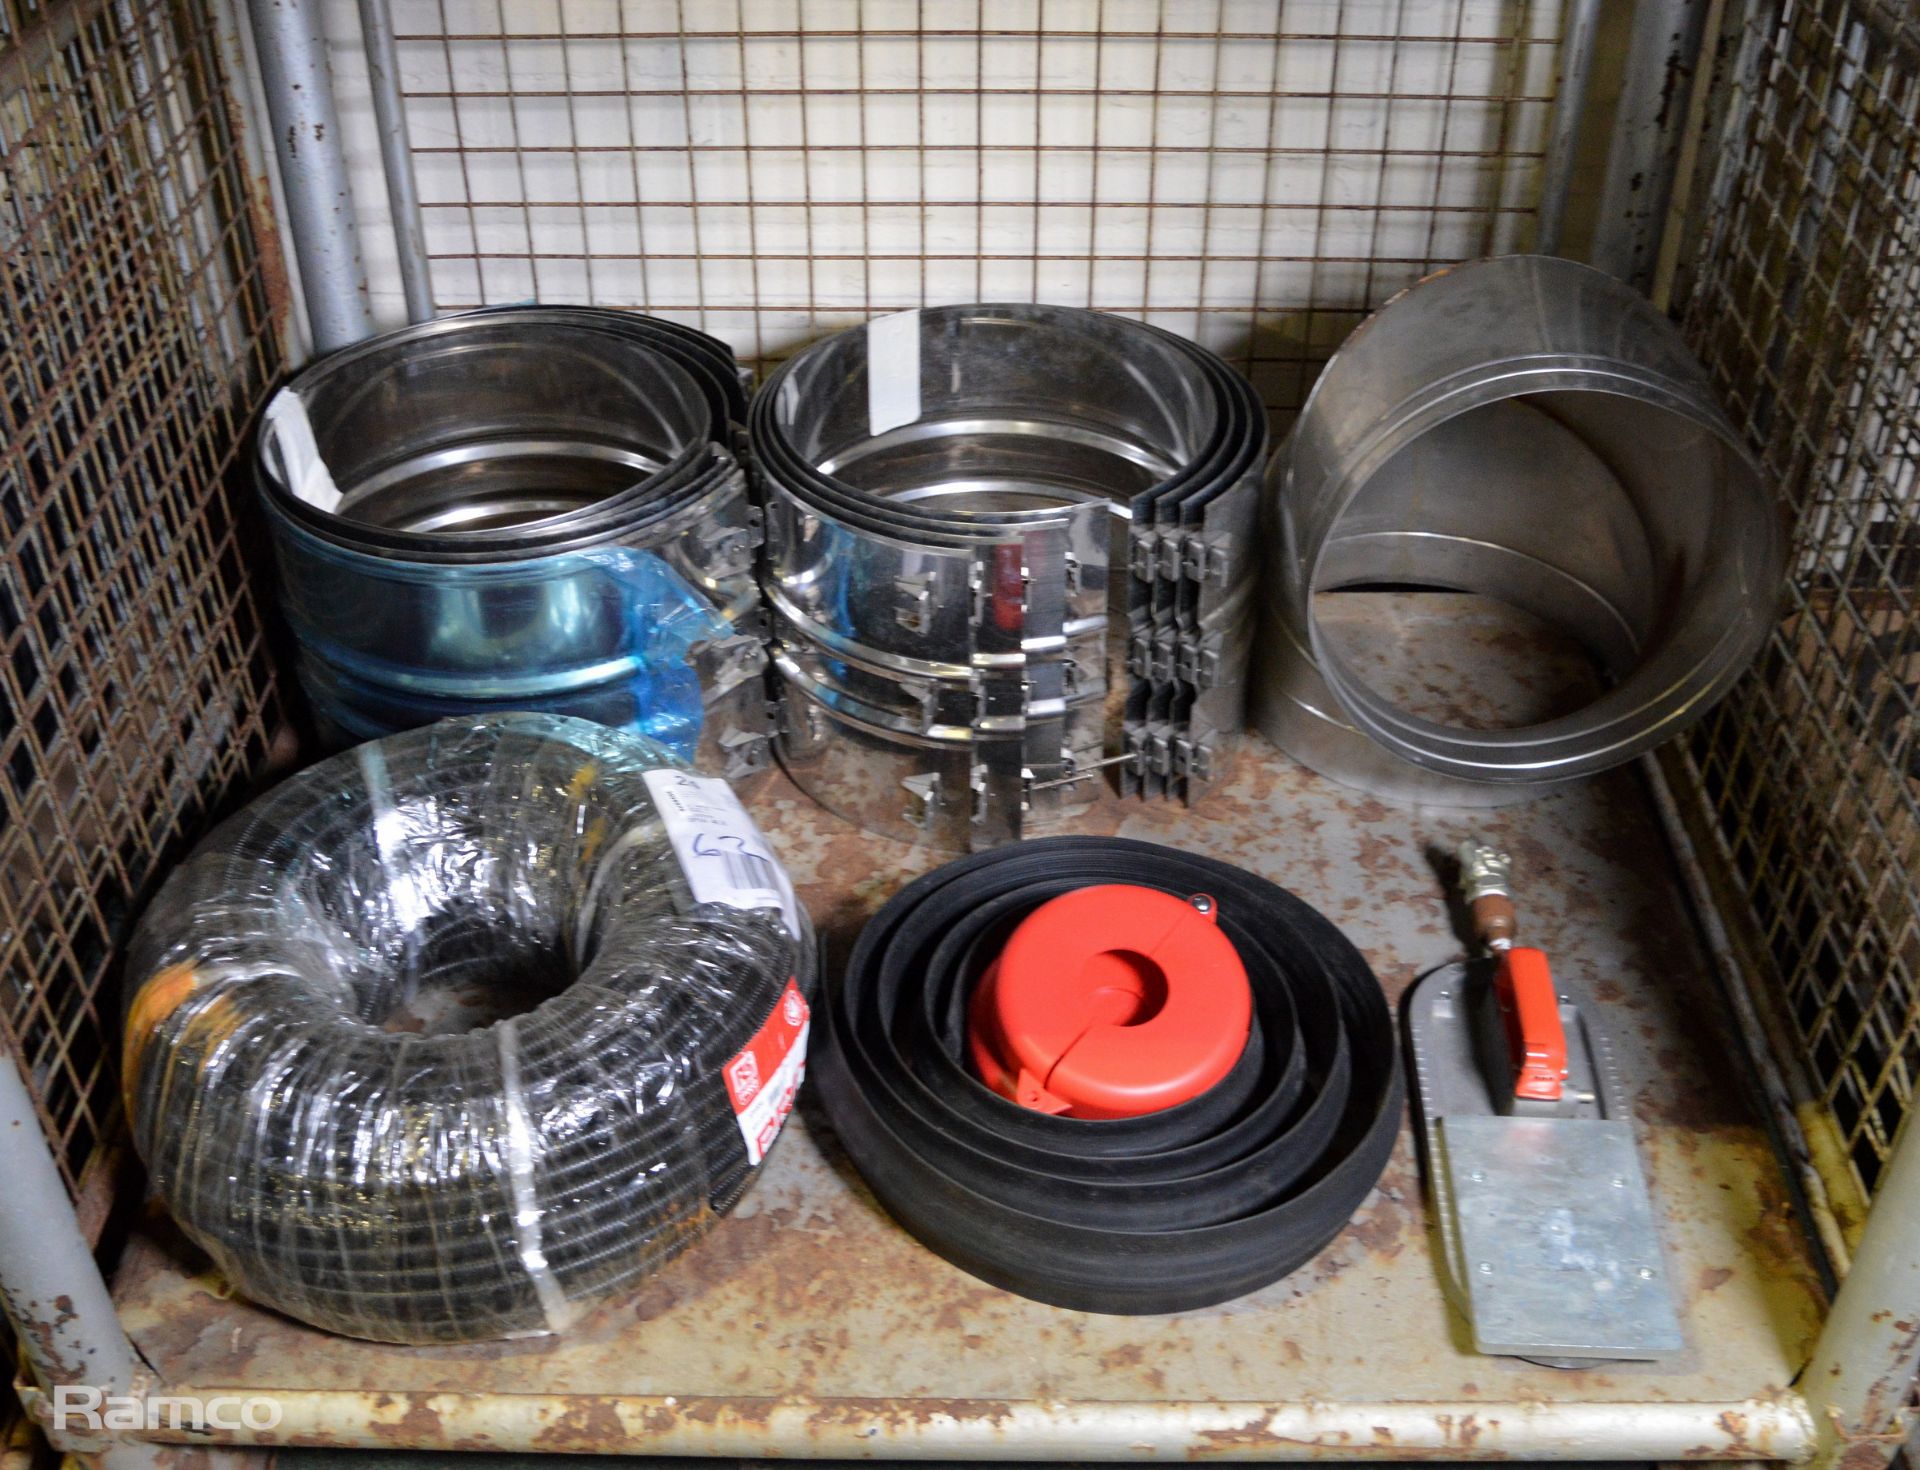 Various mechanical spares, stainless steel clamps, plastic conduit